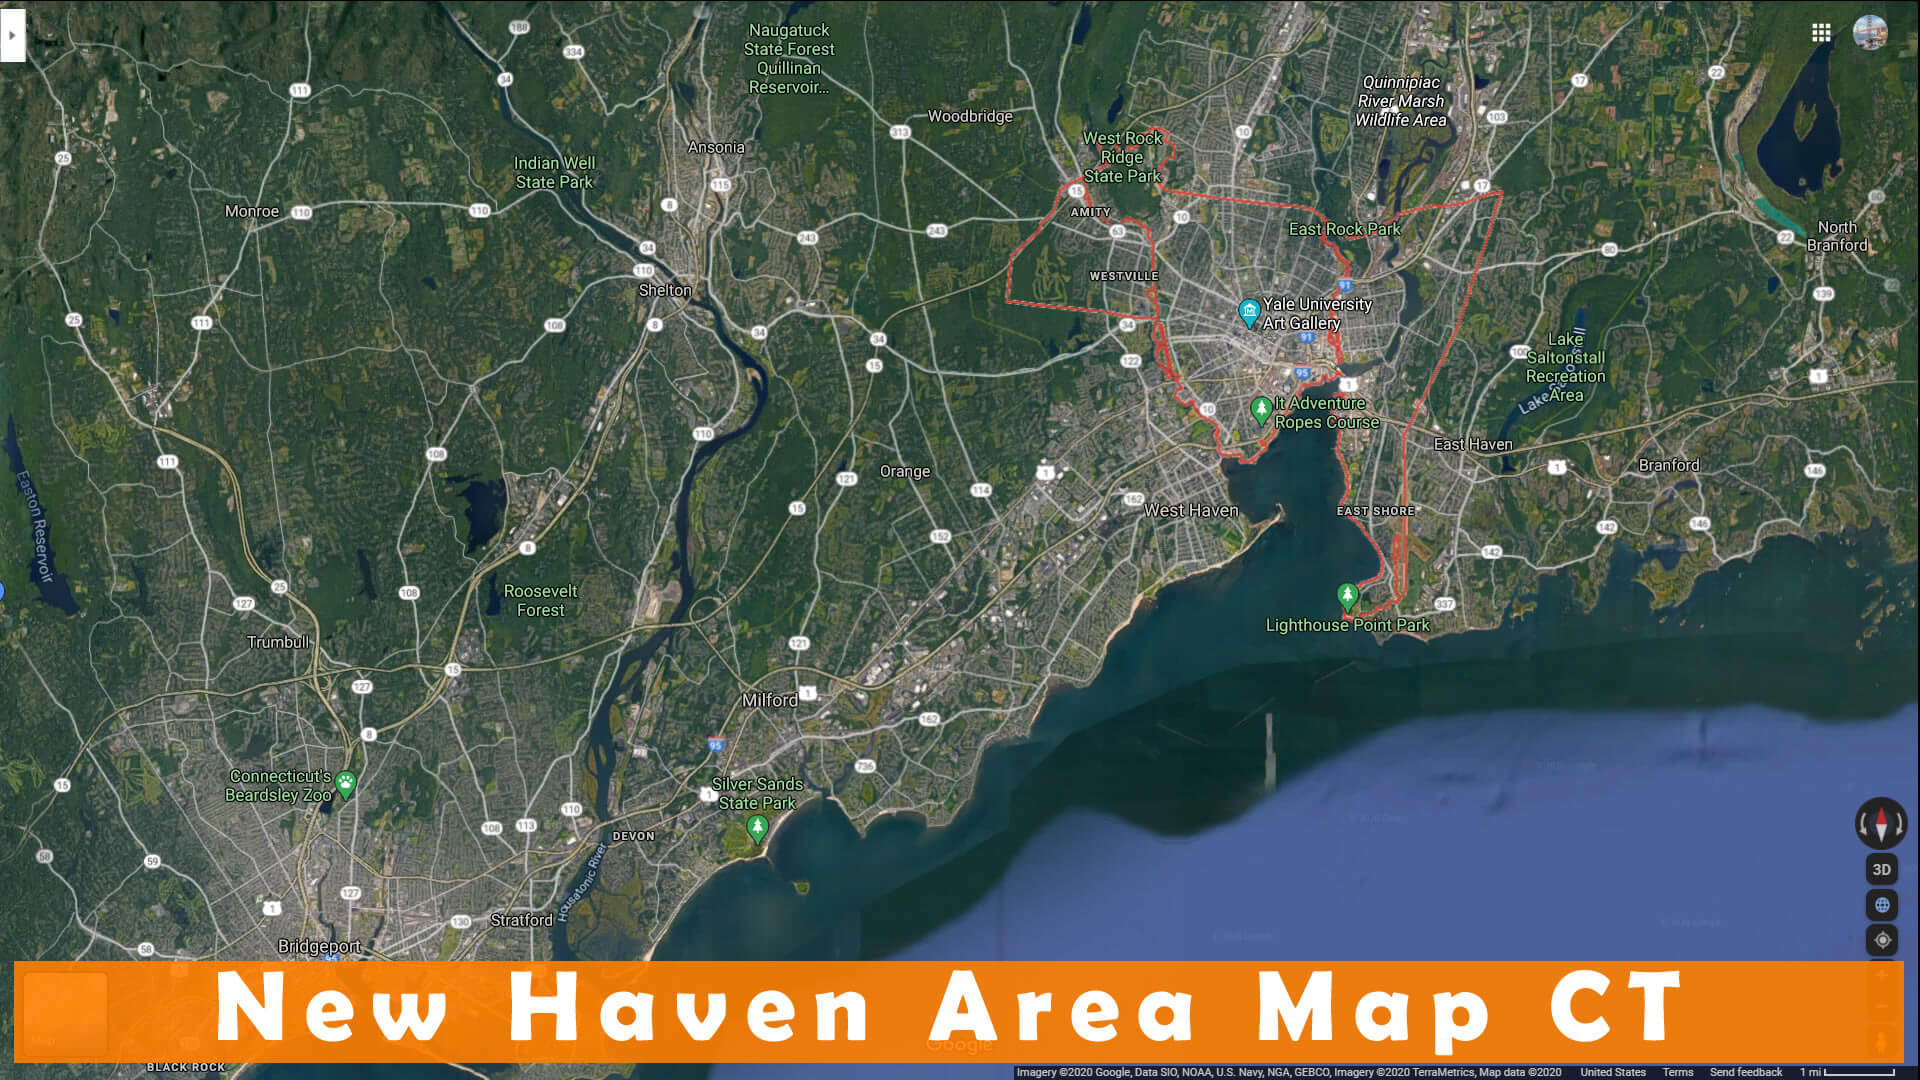 New Haven Area Map CT